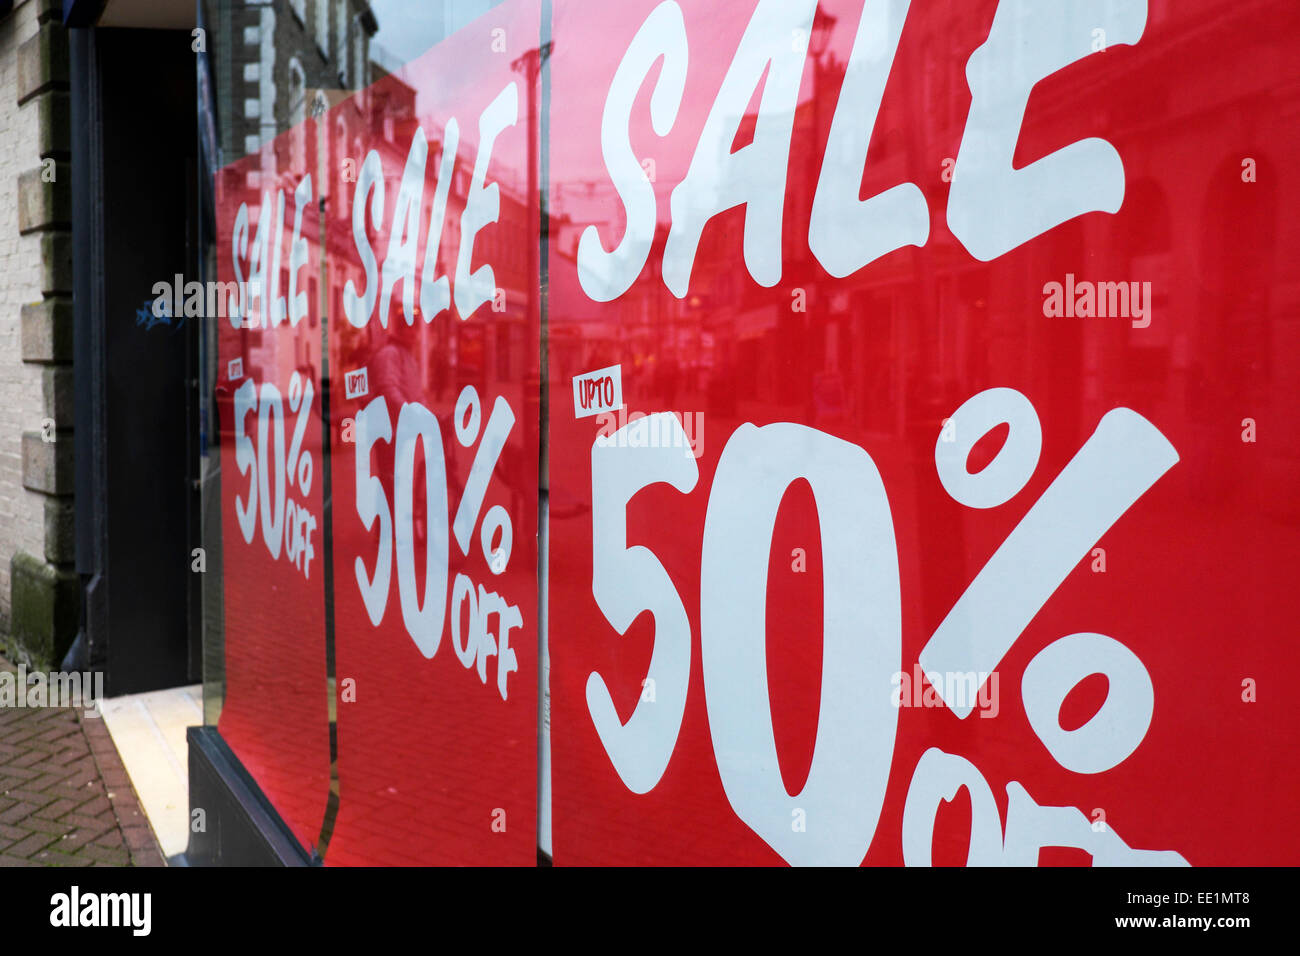 A sale sign in a shop window. Stock Photo